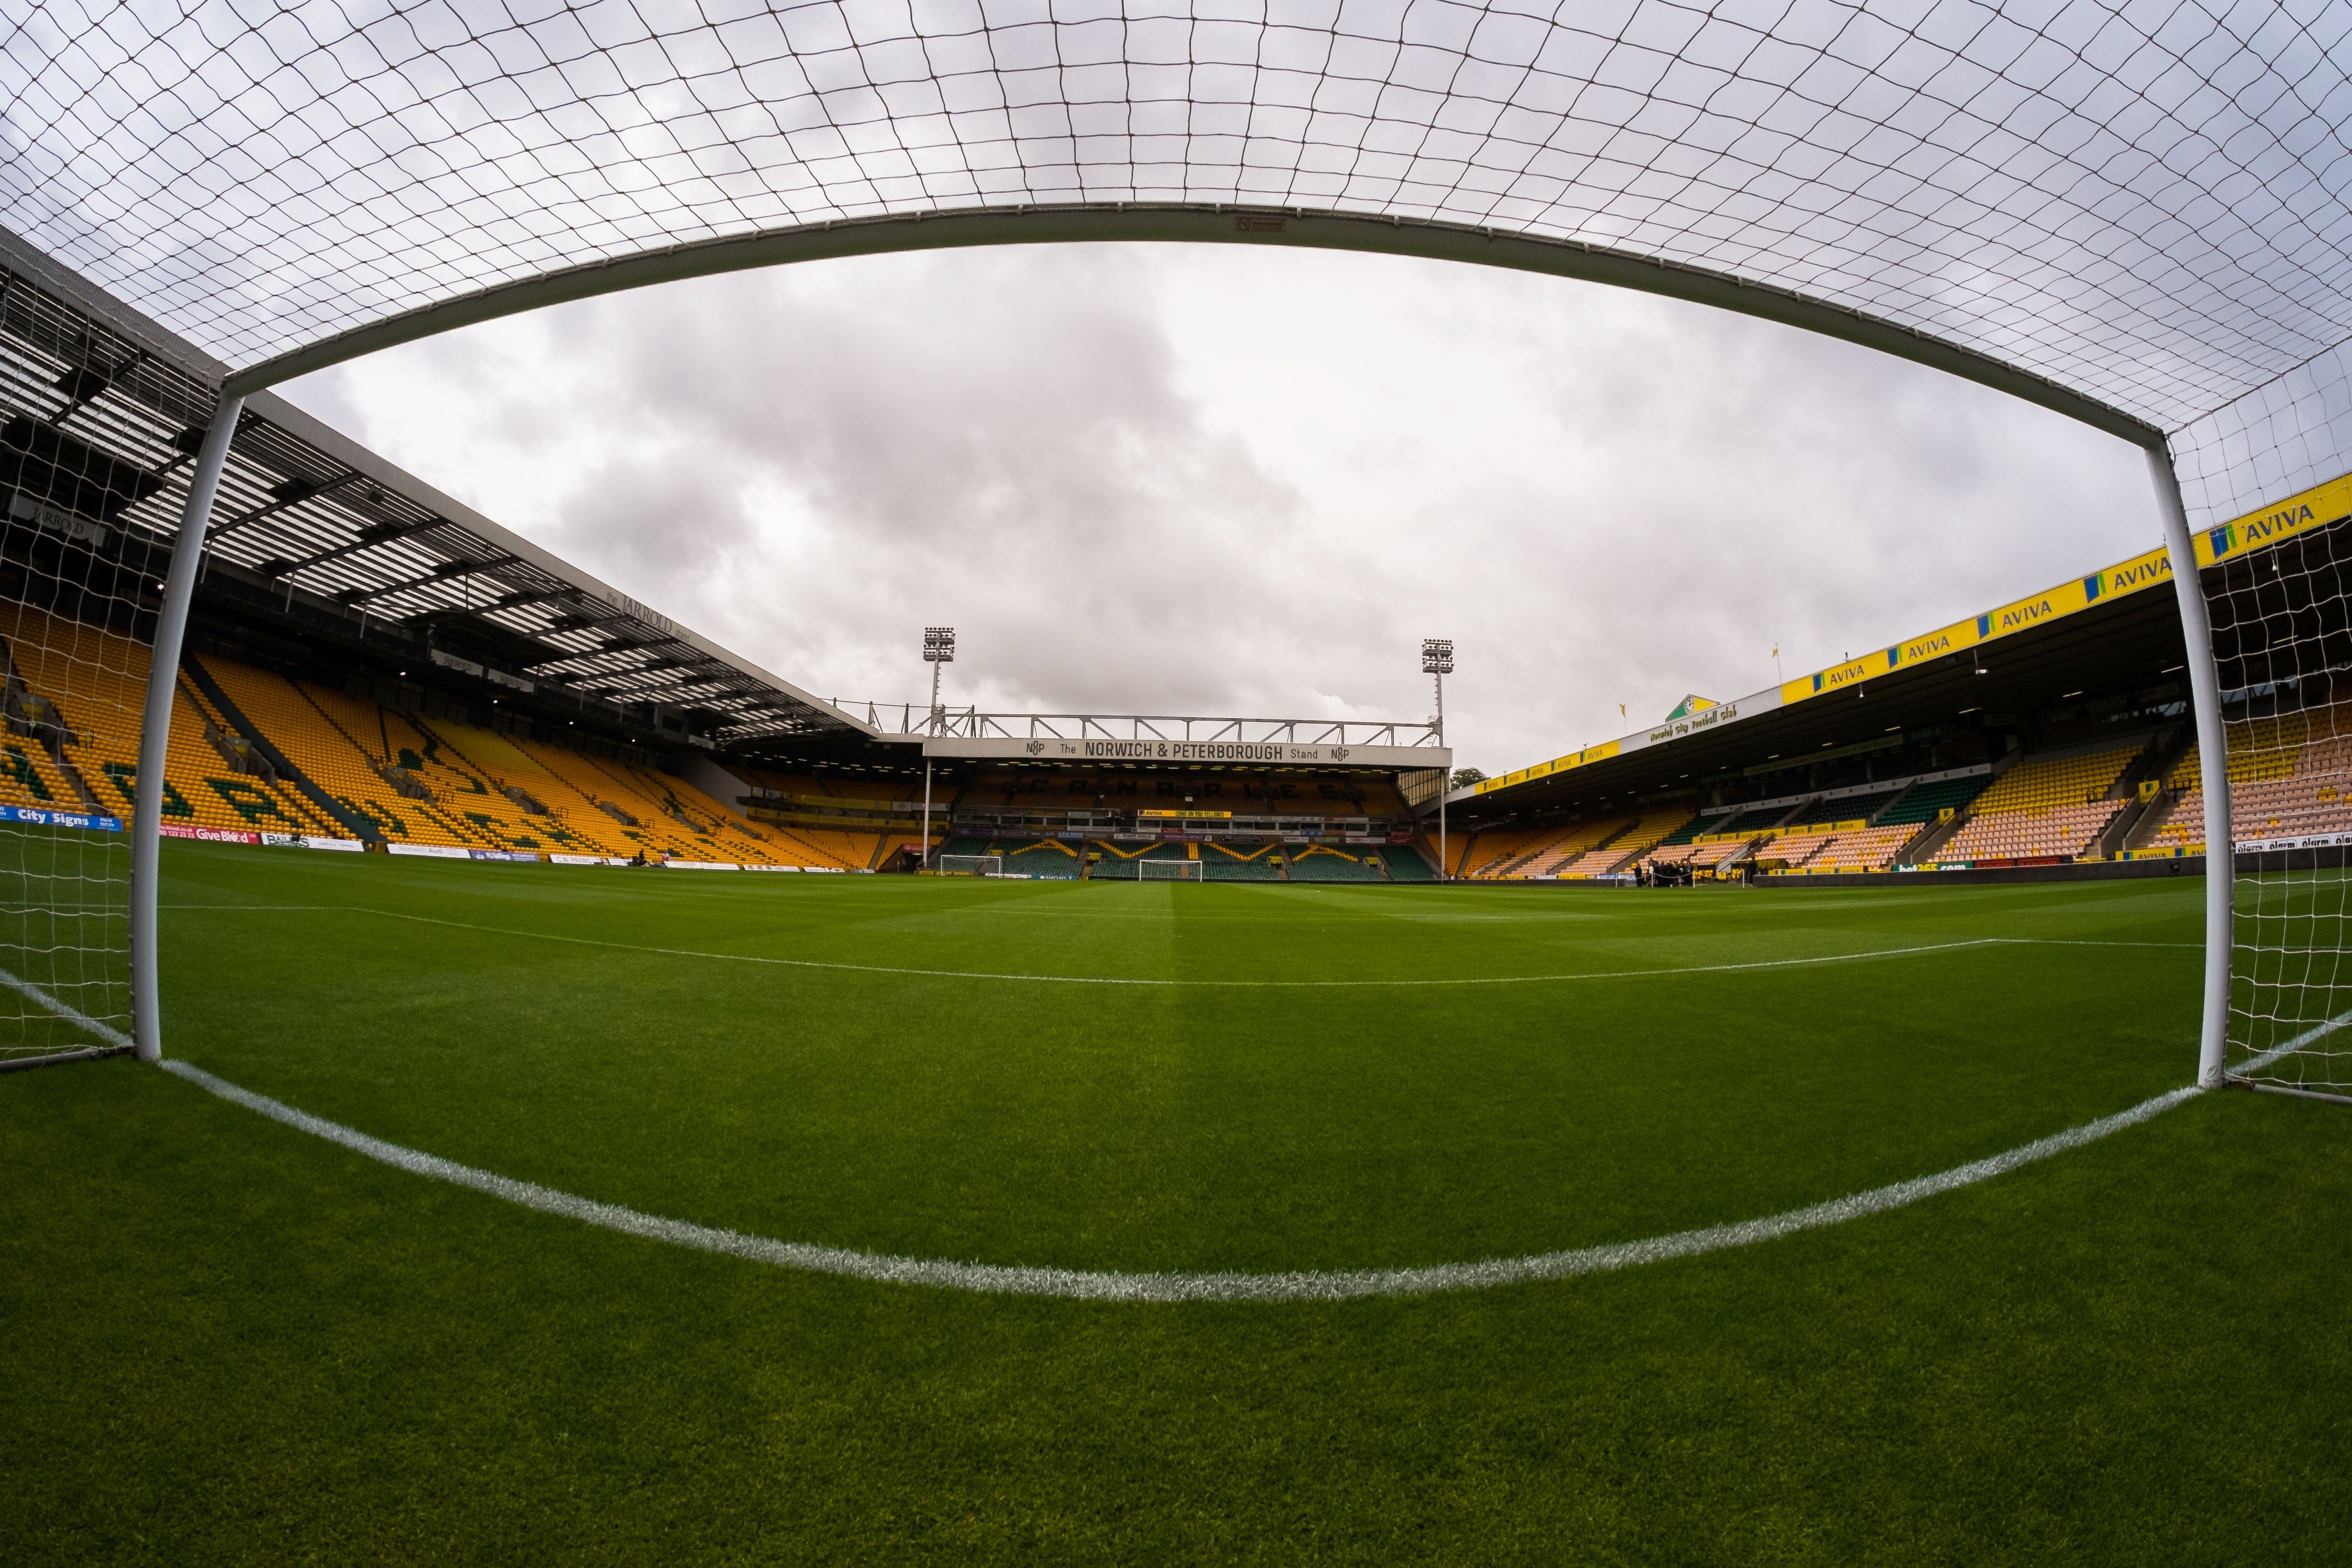 A general shot of Carrow Road, taken from the inside of the goalmouth.